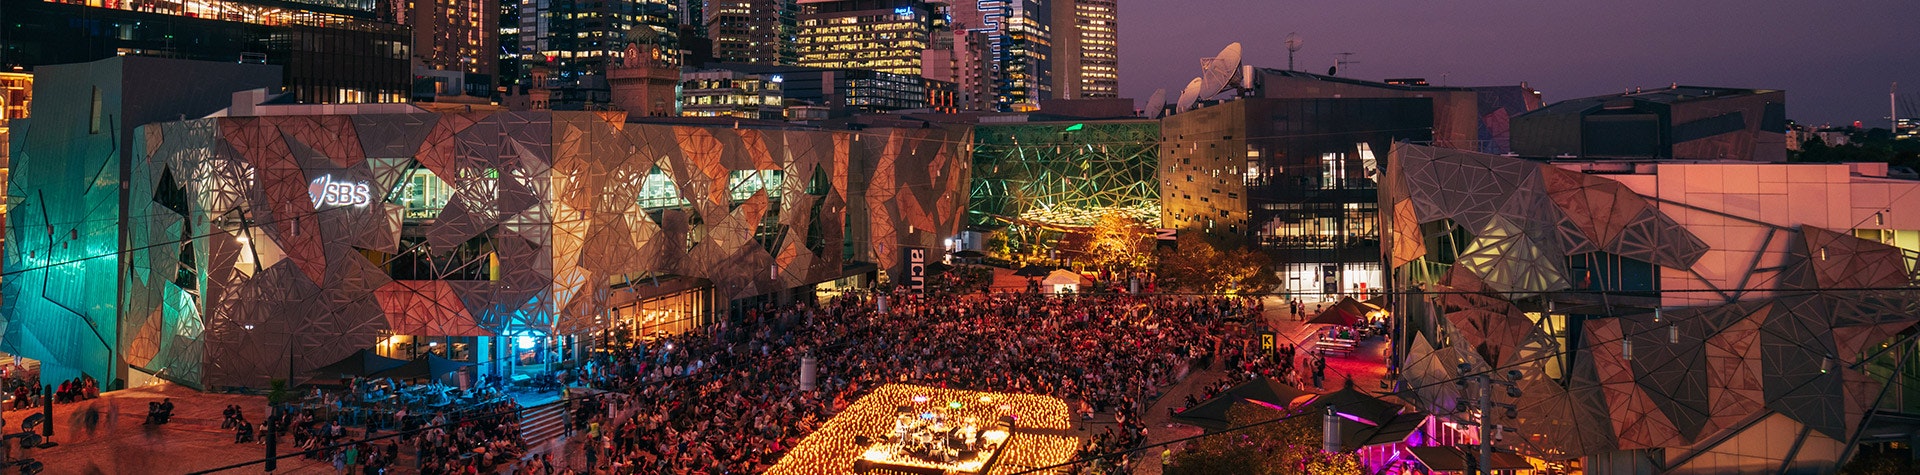 A crowd of people in the centre of Fed Square sitting around a stage that is surrounded by candles.